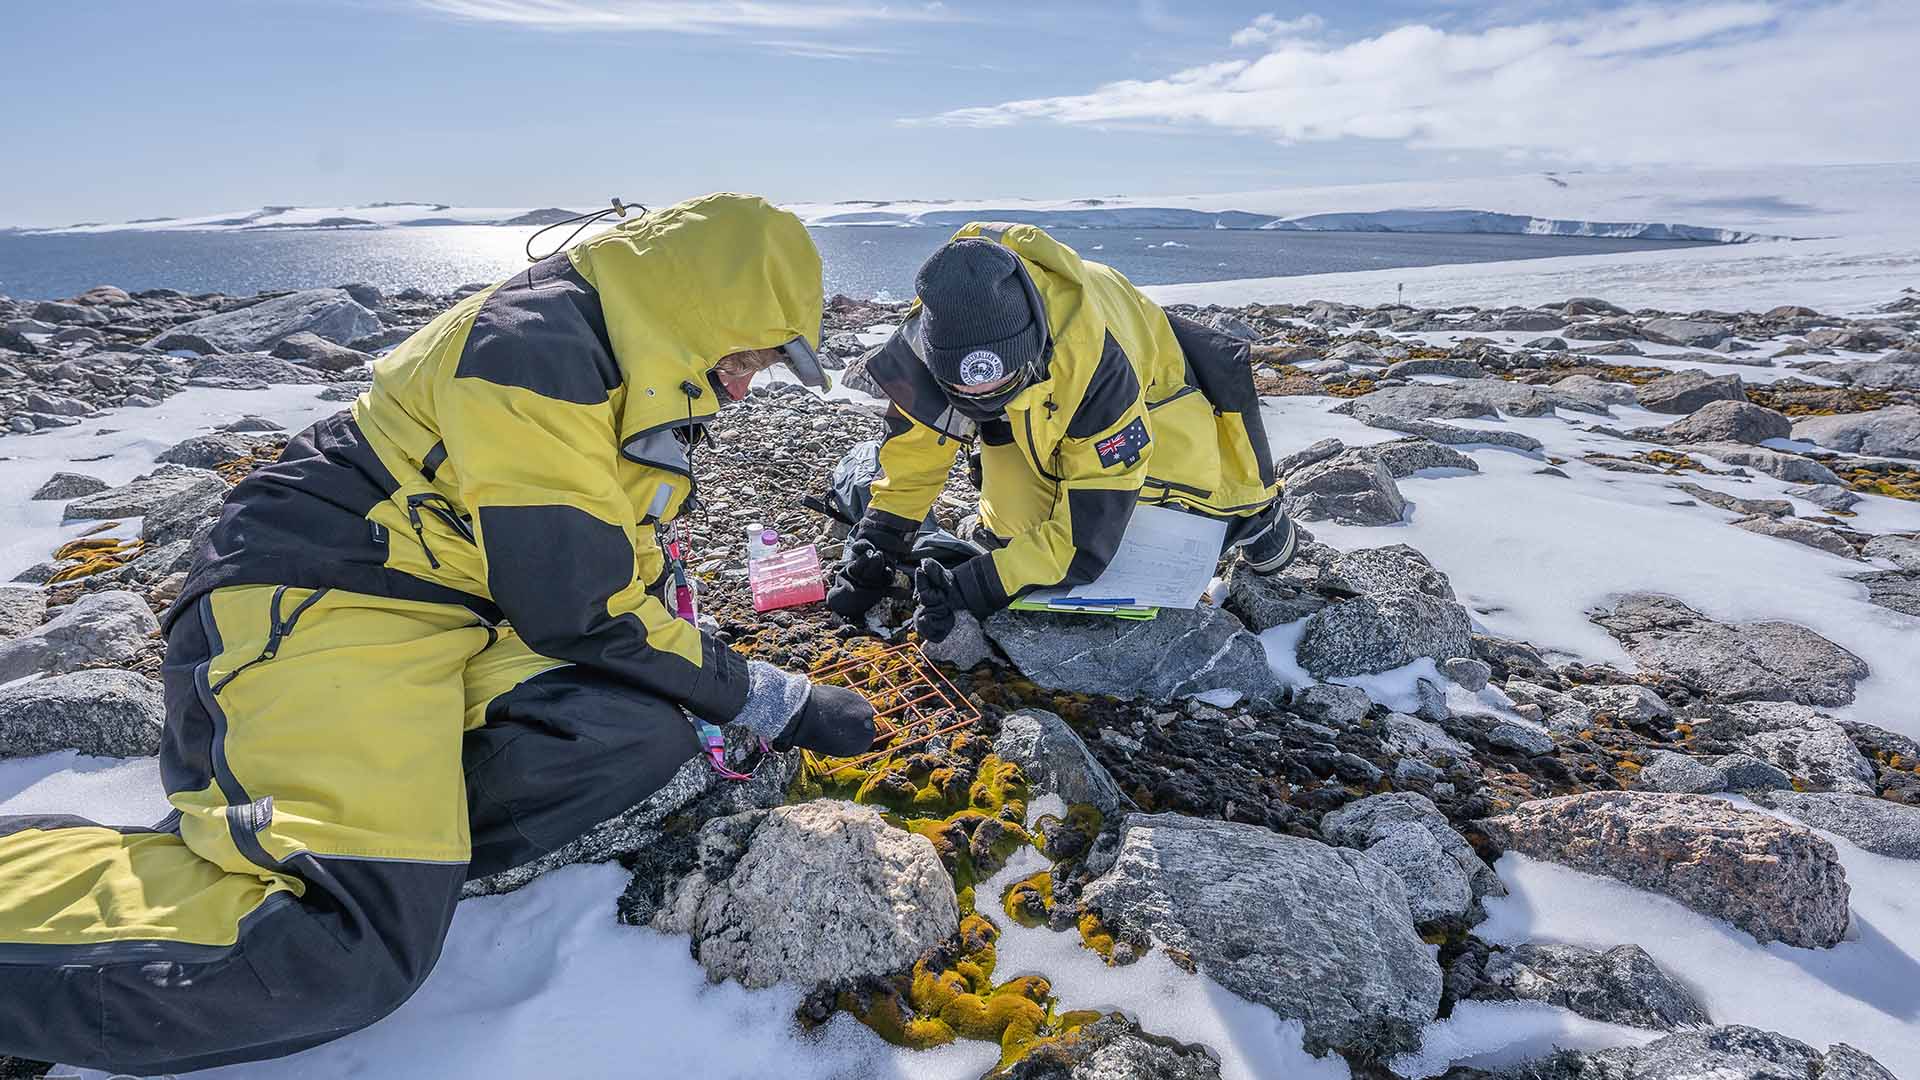 Scientists conduct research on moss beds in Antarctica. Photo by Emiliano Cimolini